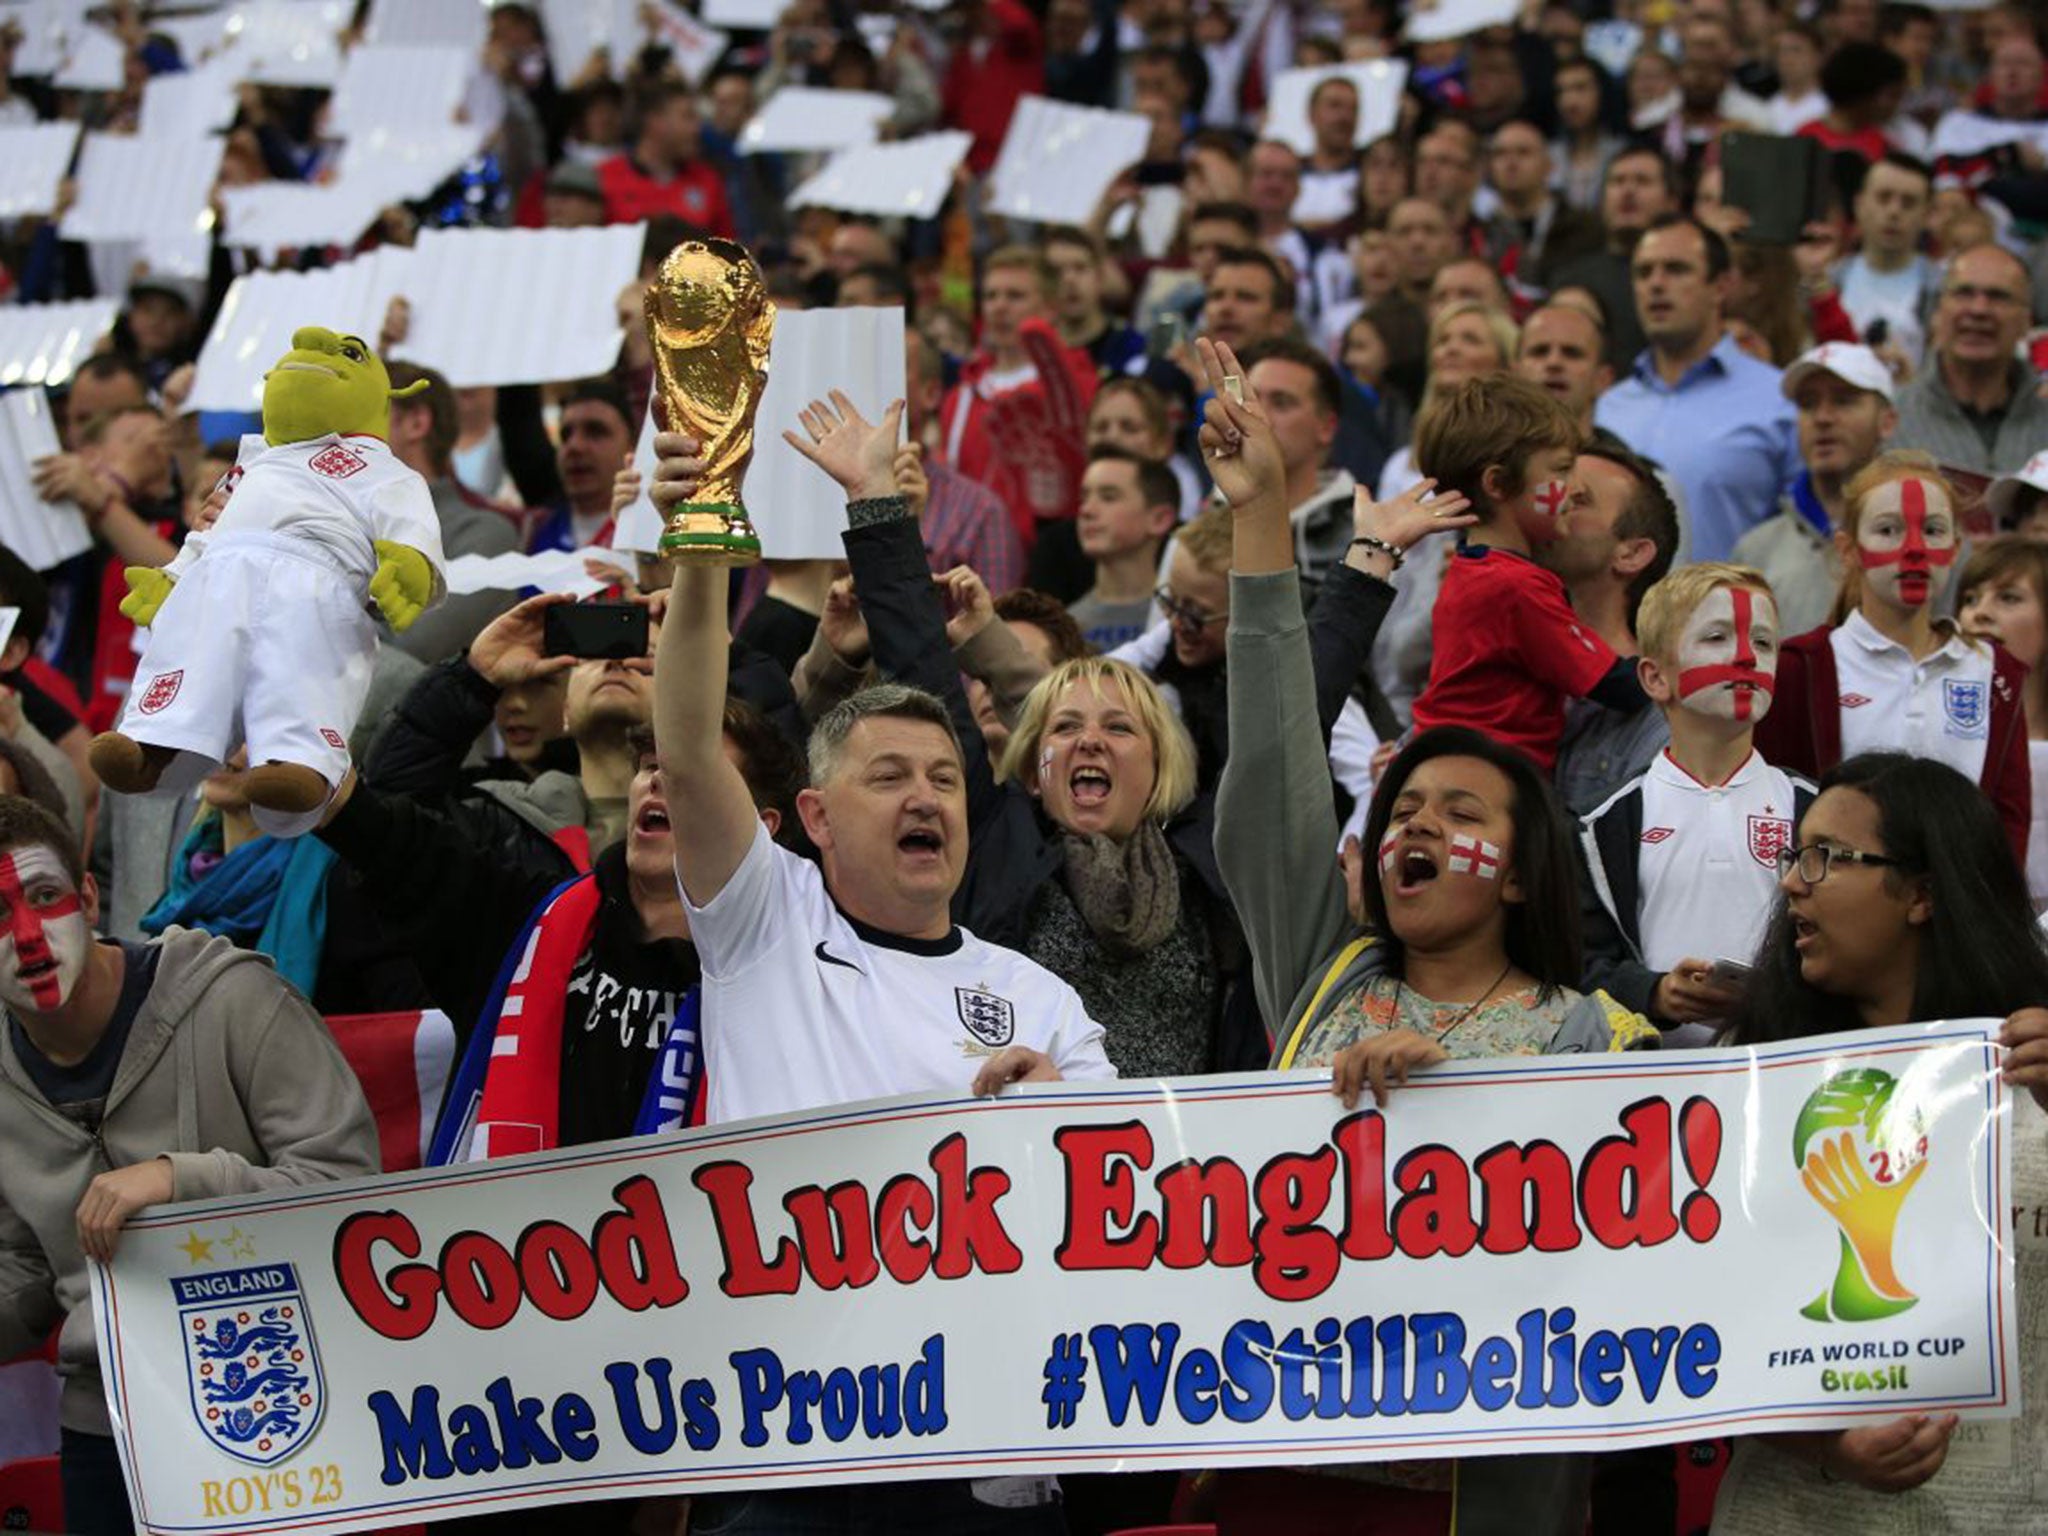 Almost 84,000 fans saw England play a friendly against Peru at Wembley in May